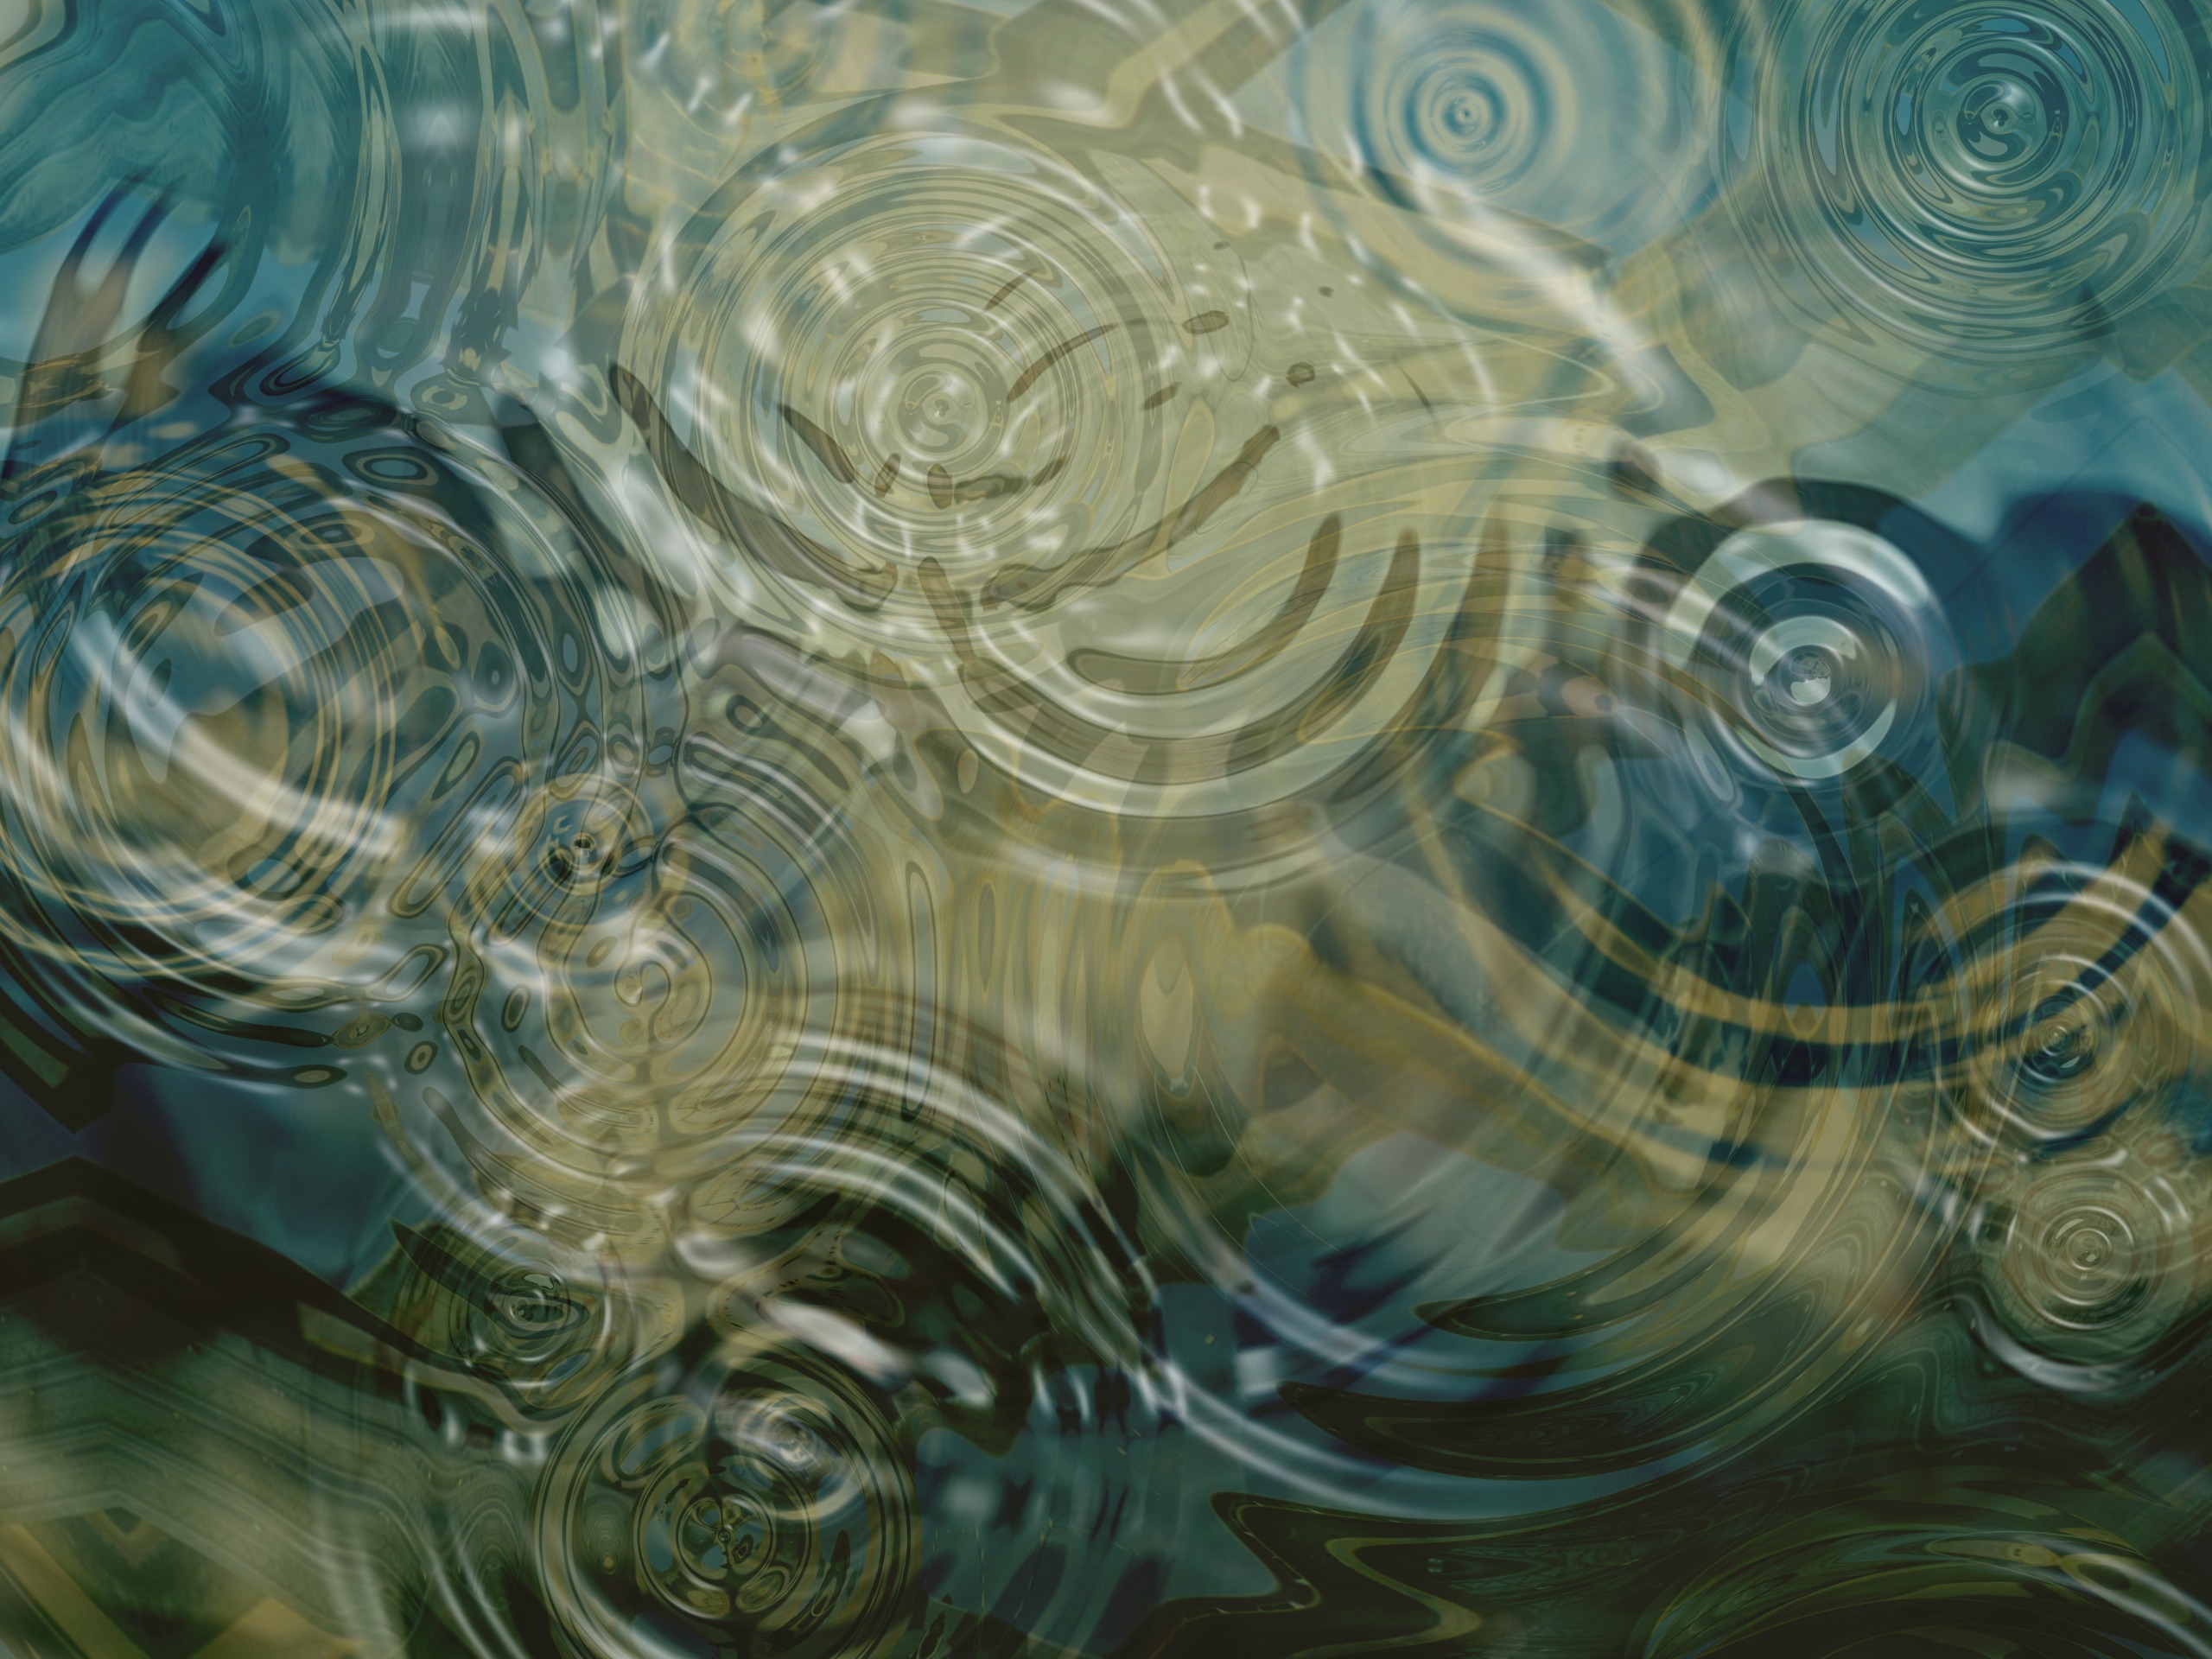 A close up of ripples on a pond